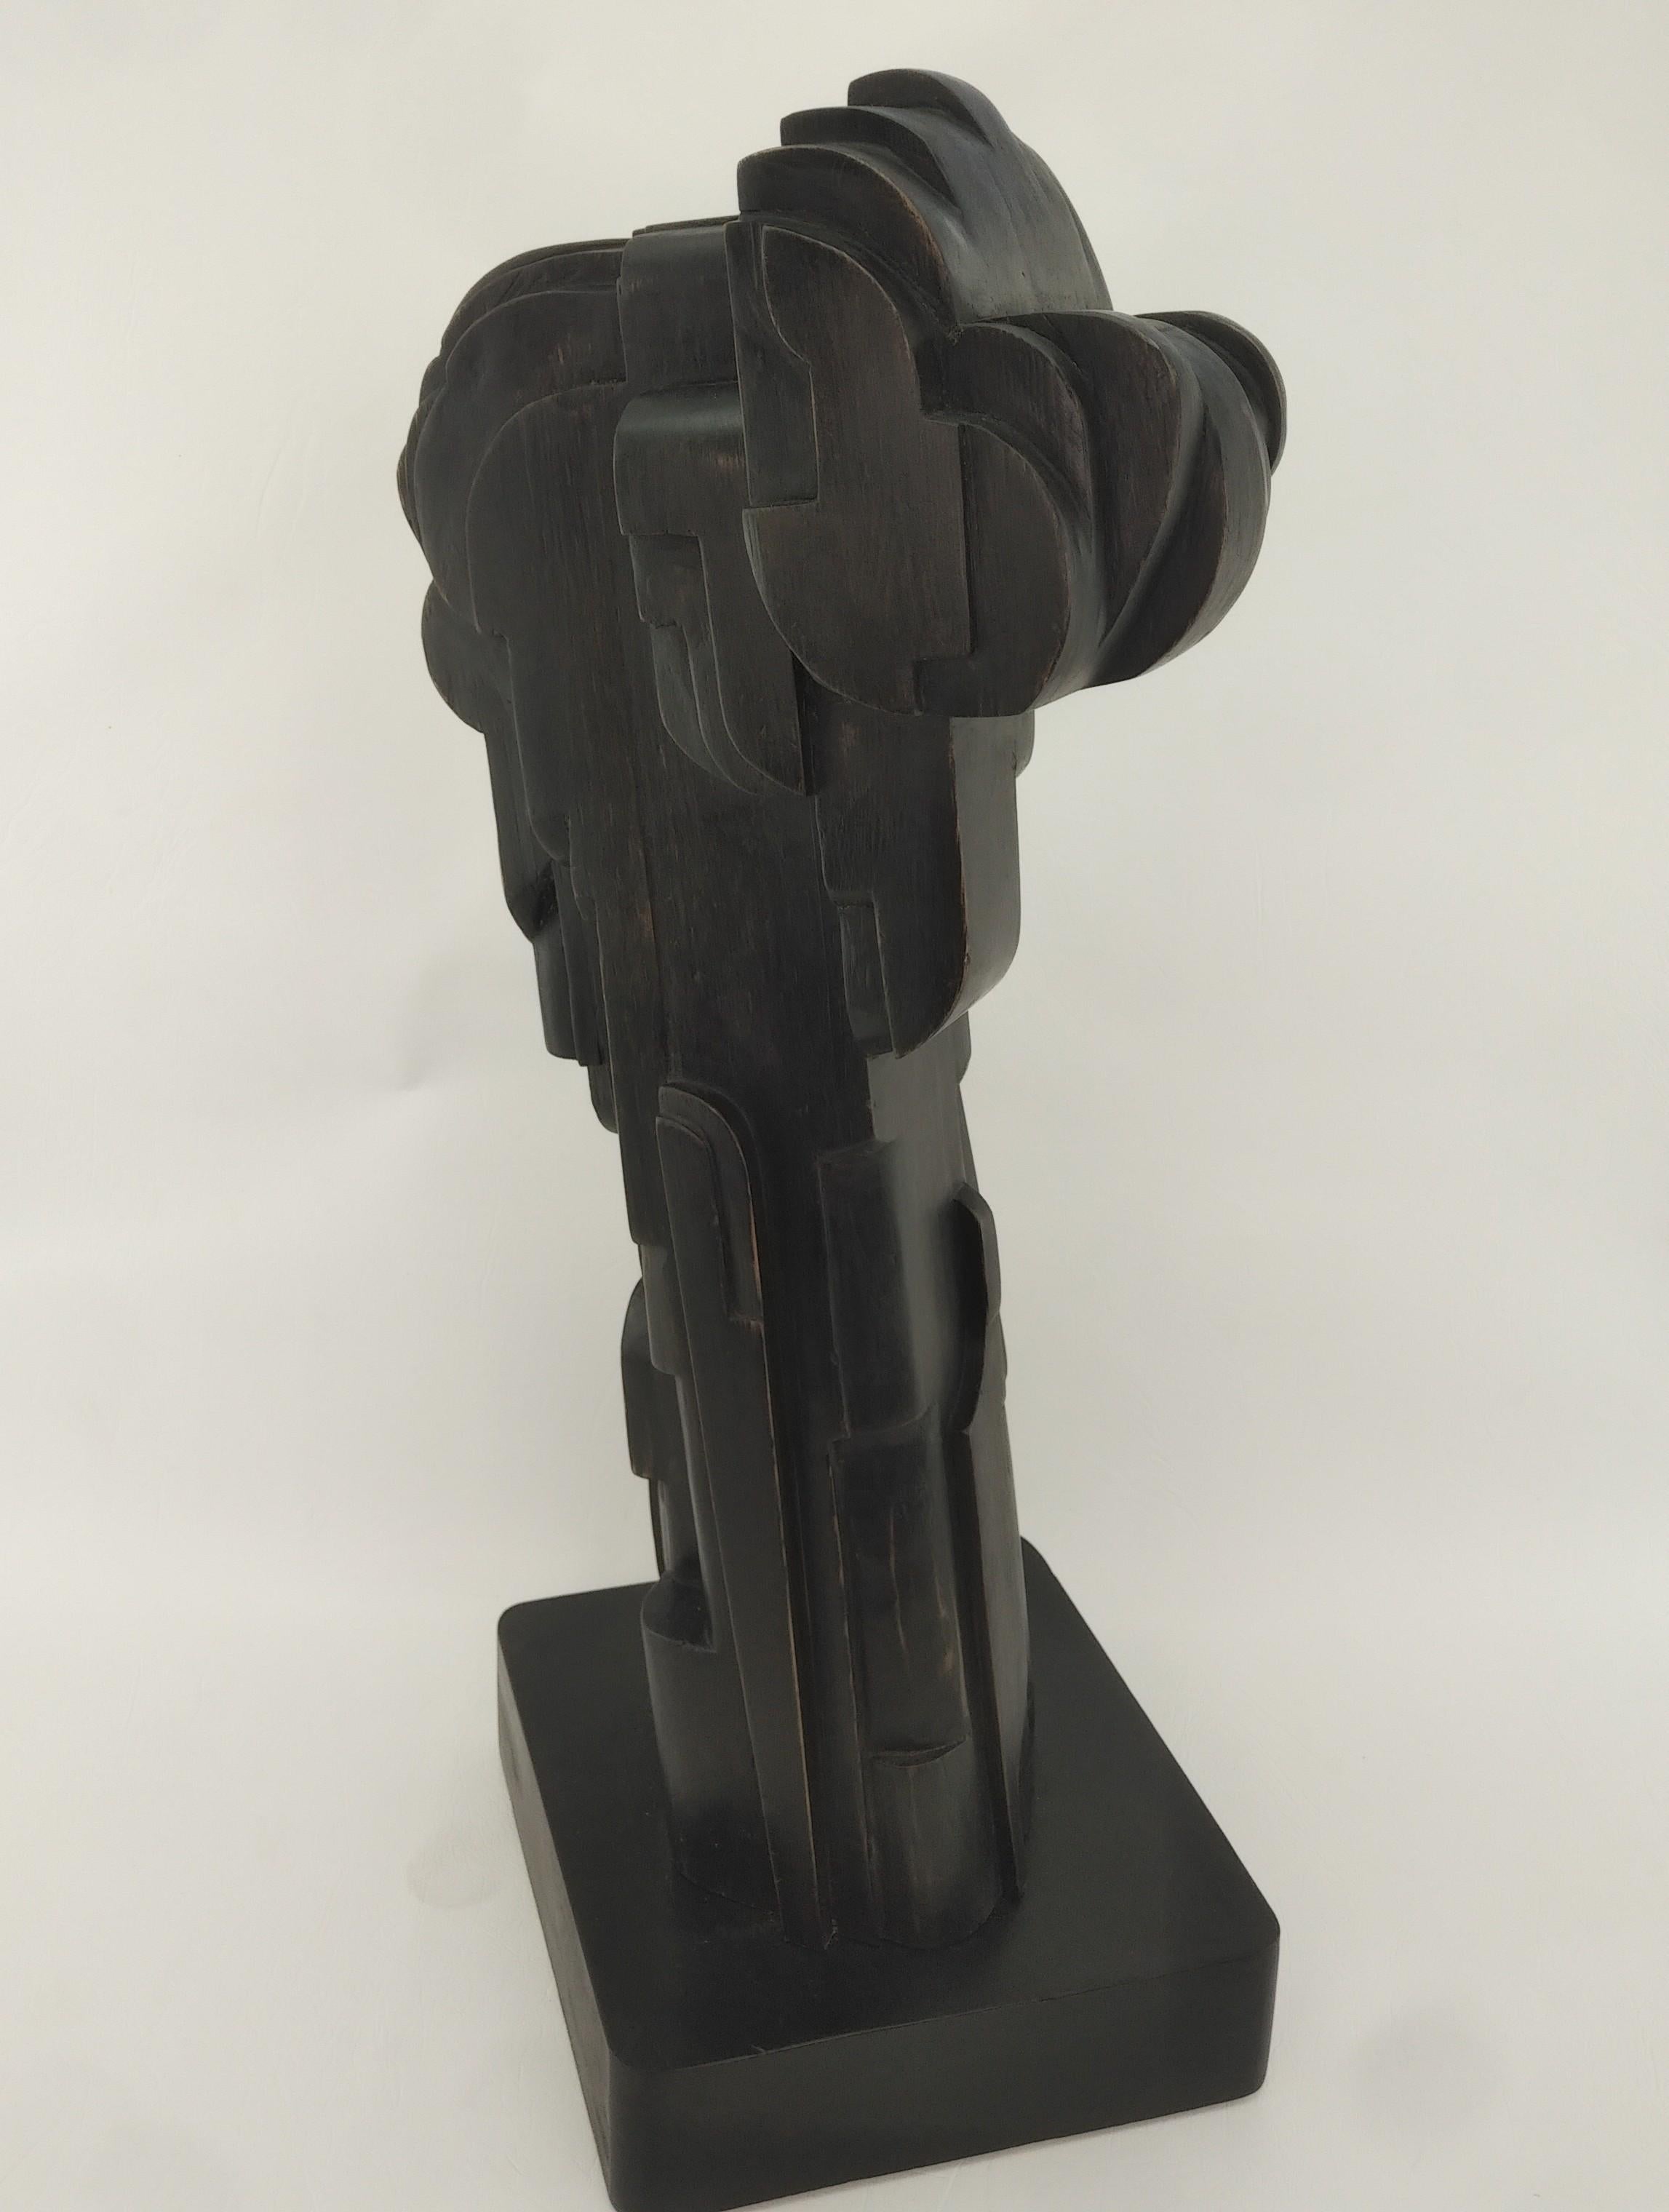 Modern Abstract Constructivist Wood Sculpture Signed Czeslaw Budny  In Excellent Condition For Sale In Hamilton, Ontario